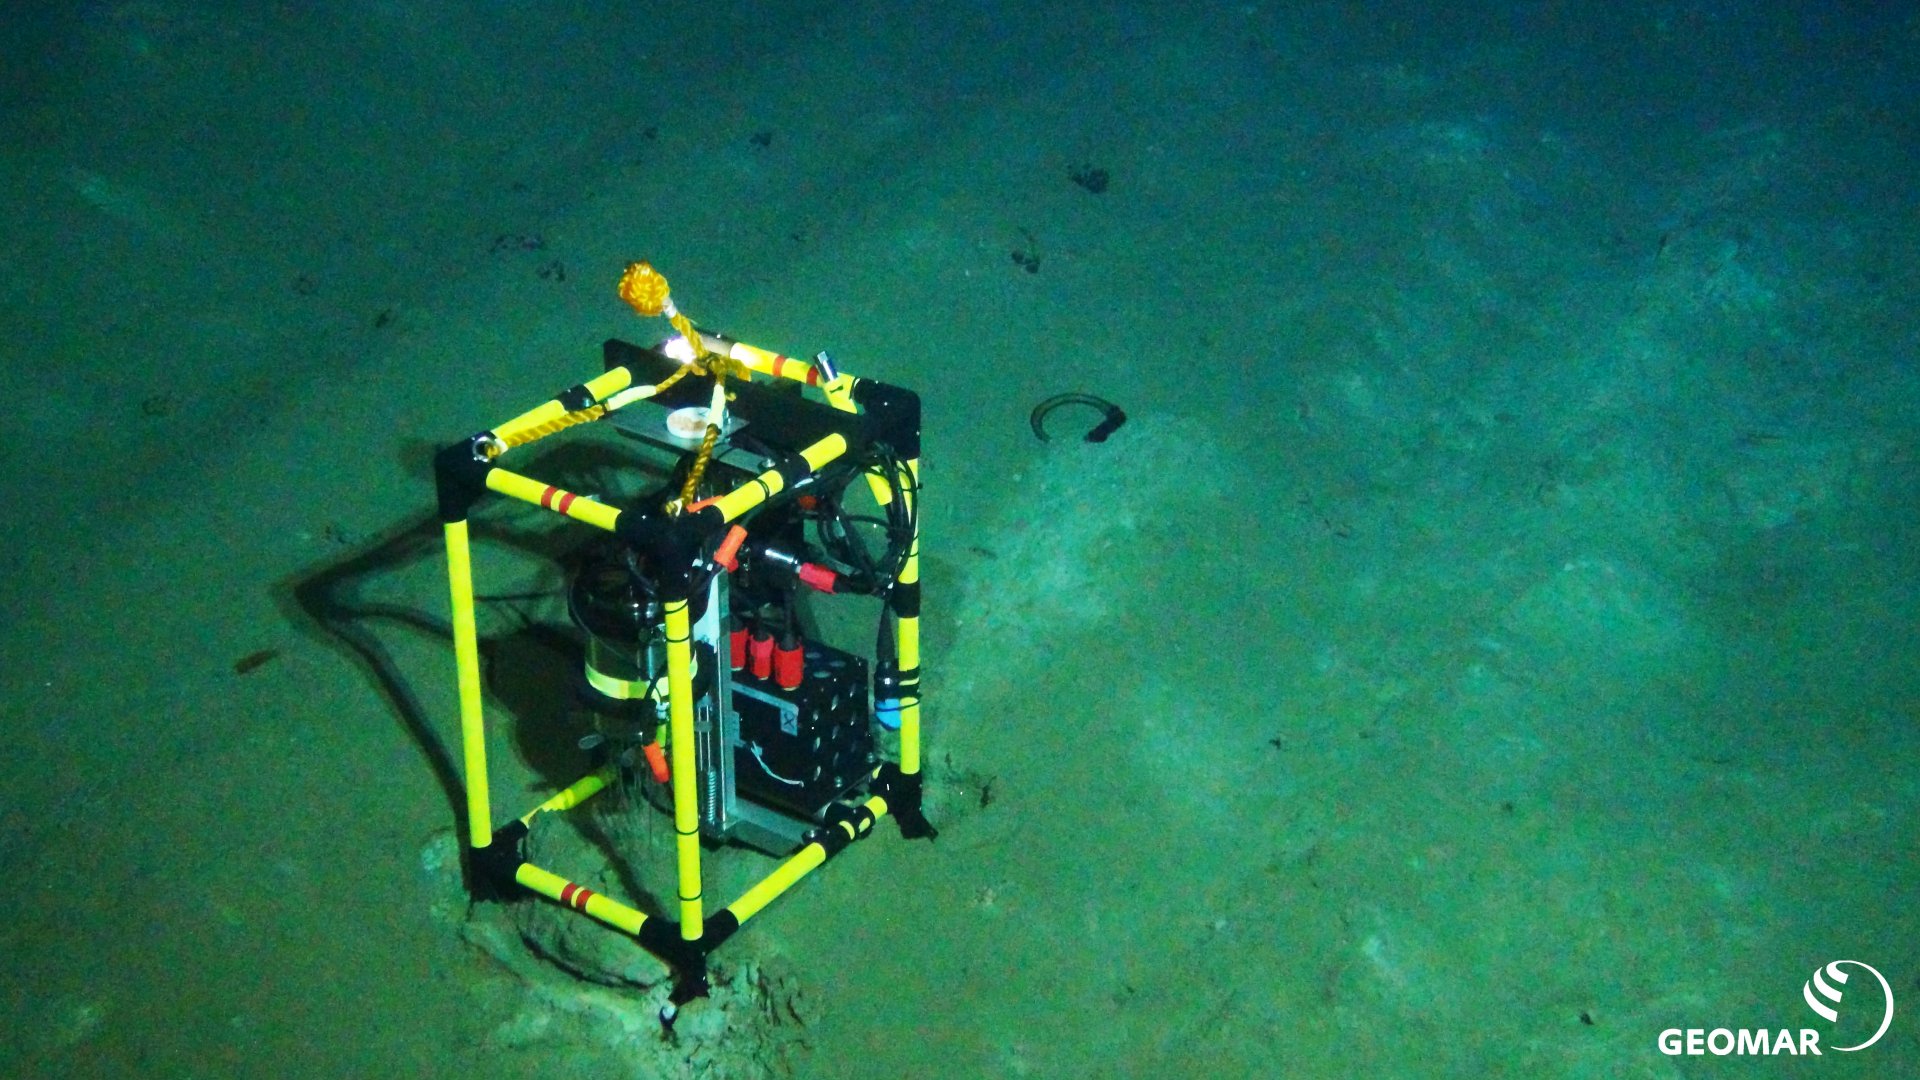 Respiration measurements directly next to a plough track as a measure of seafloor microbial activity in the DISCOL area during the SO242 expedition. Even 26 years after being disturbed by a harrow, the plough marks on the seafloor are still clearly visible (Source: ROV team/GEOMAR)